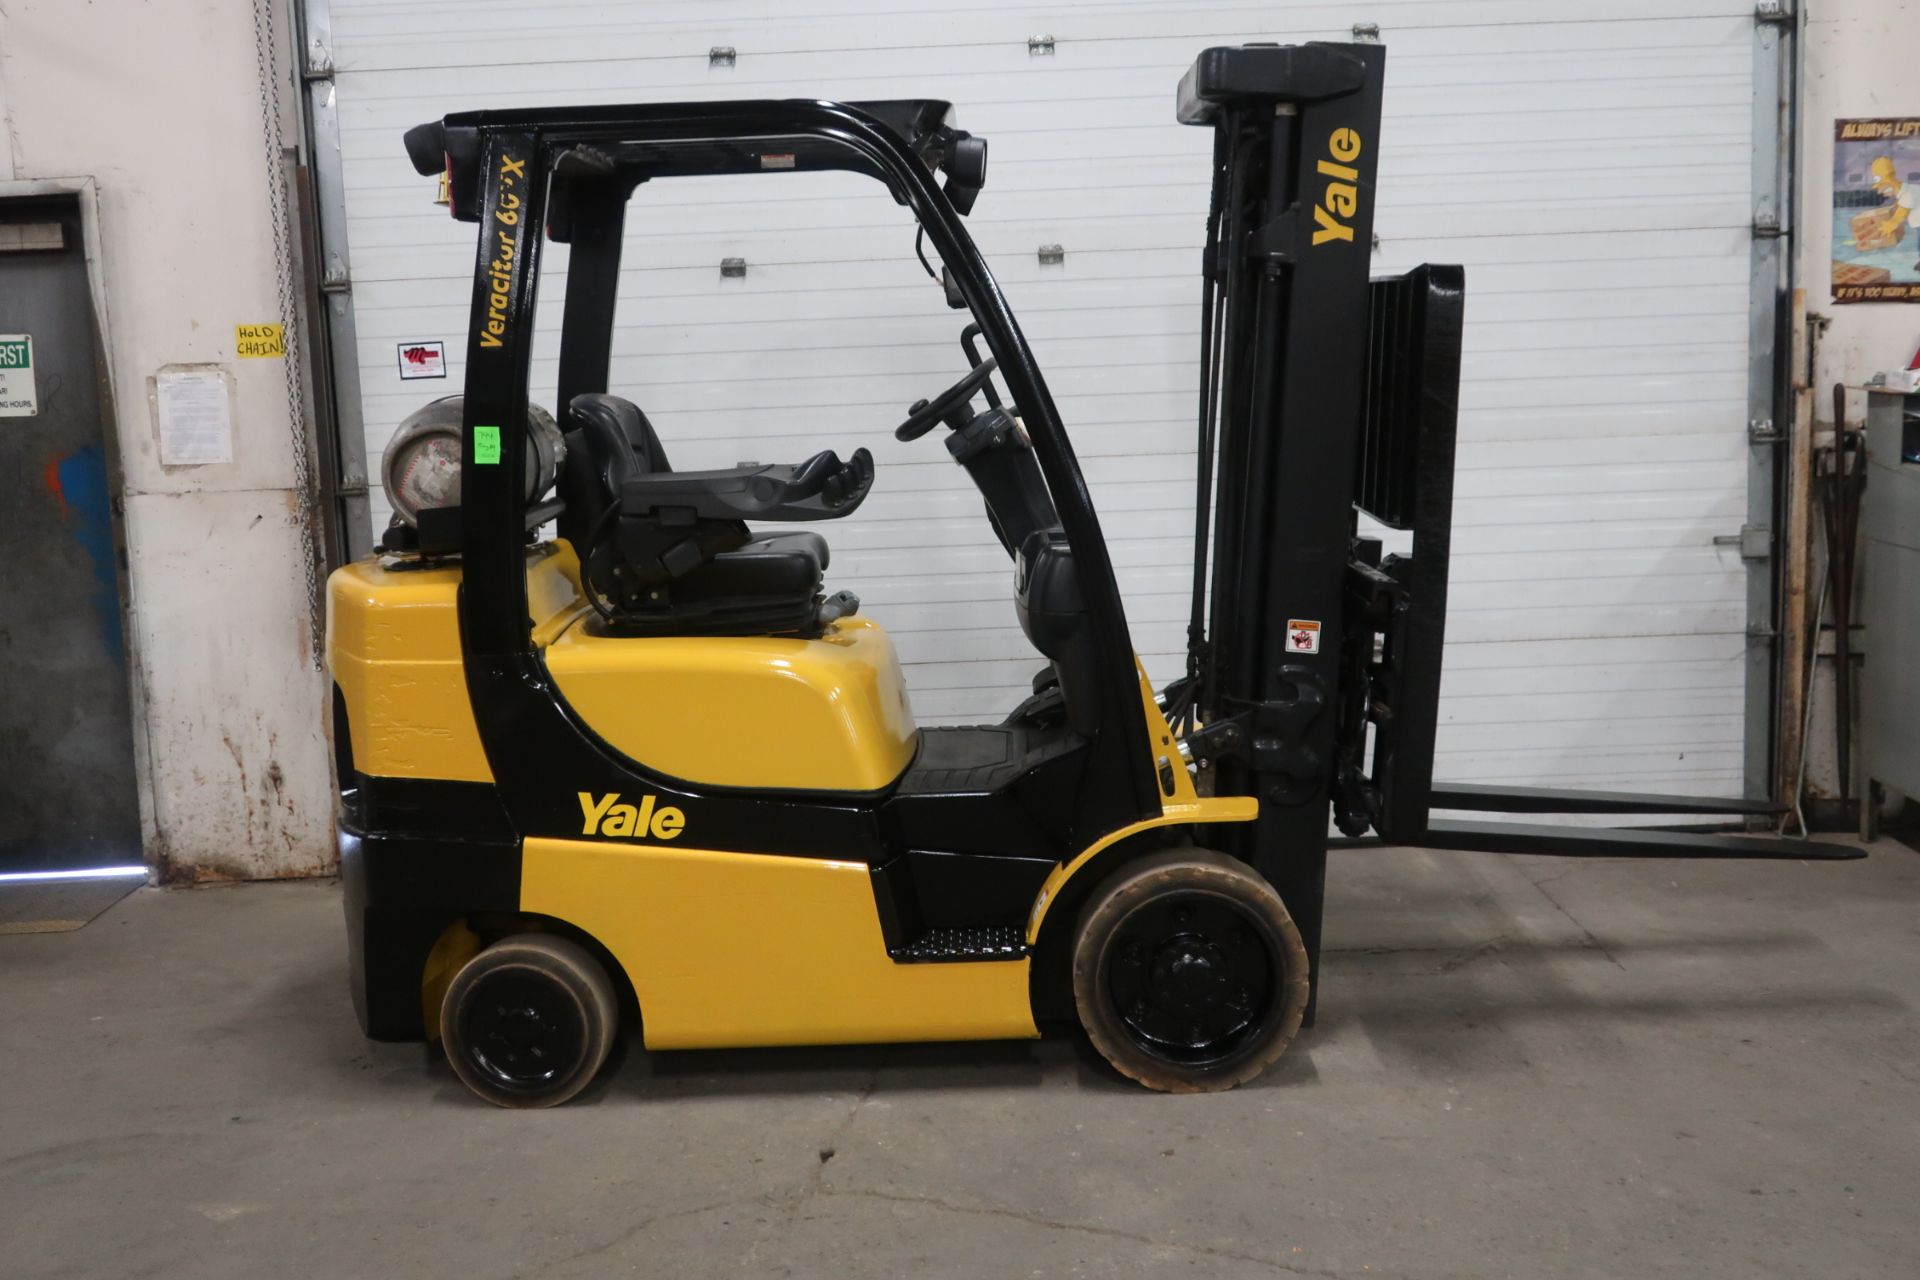 FREE CUSTOMS - 2015 Yale 6000lbs Capacity Forklift with 3-stage mast - LPG (propane) with Fork